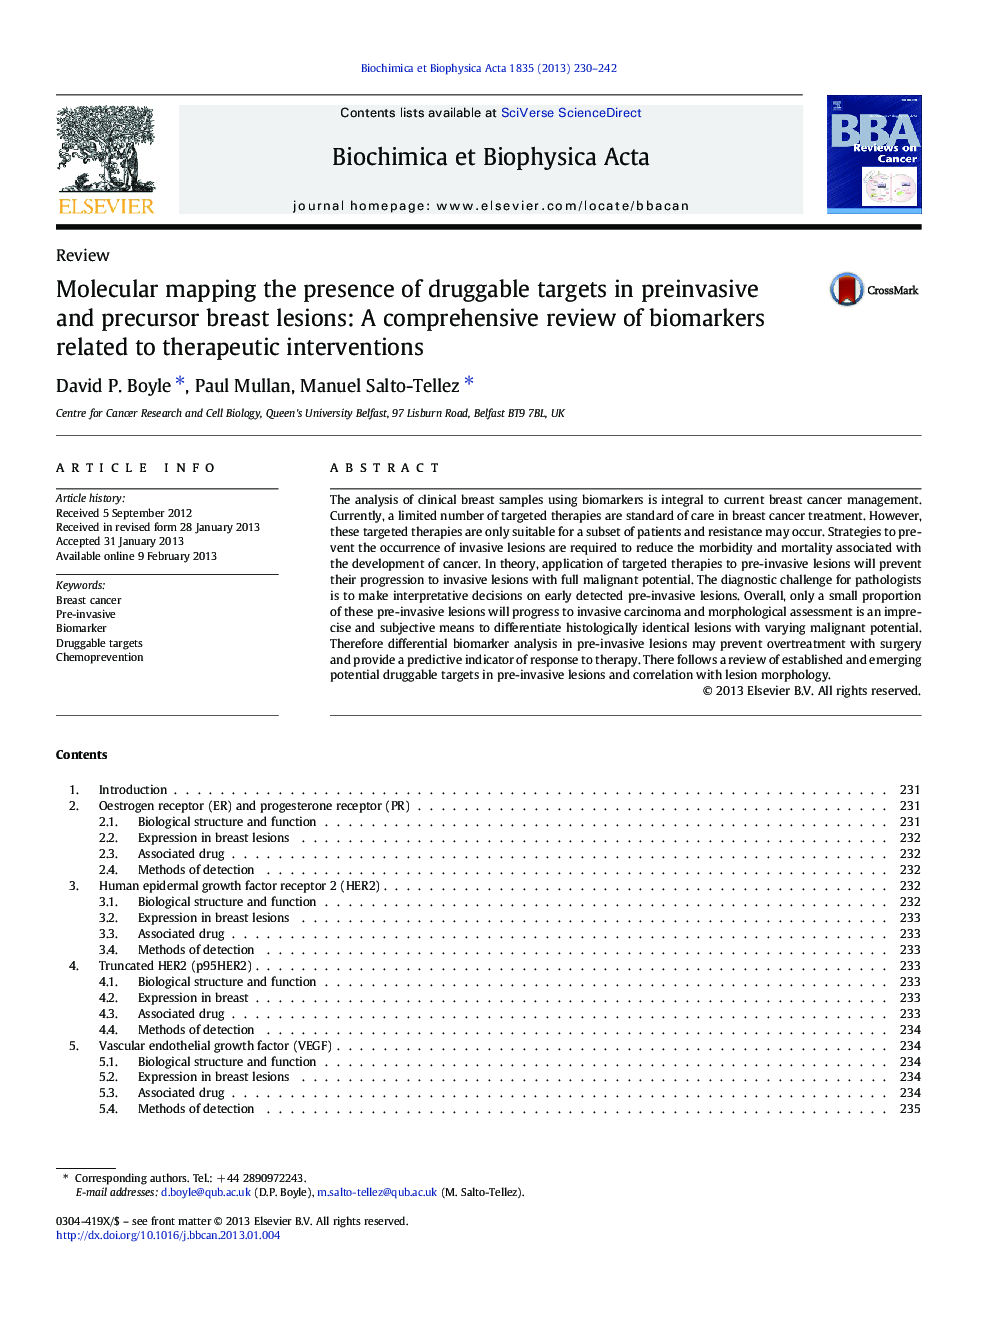 Molecular mapping the presence of druggable targets in preinvasive and precursor breast lesions: A comprehensive review of biomarkers related to therapeutic interventions